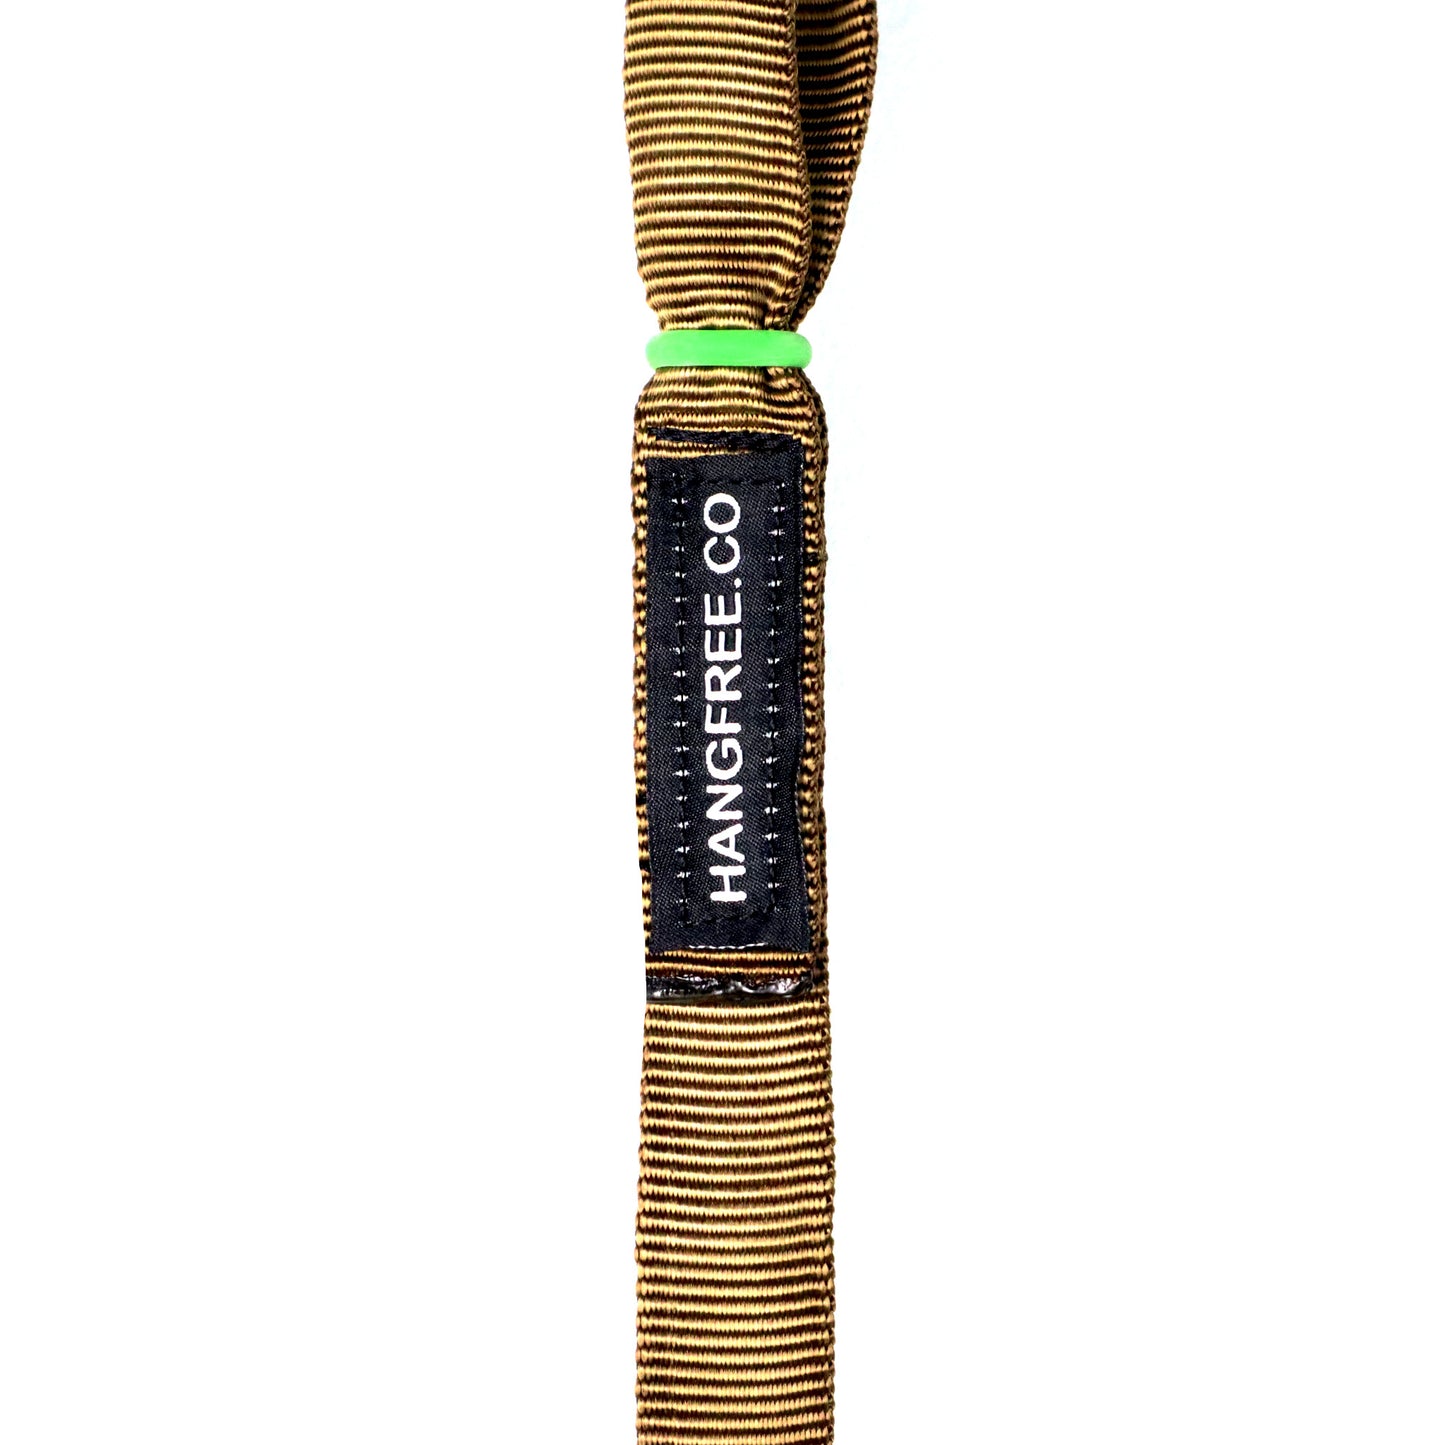 Double Step Sewn Climbing Stick Aider Green Band